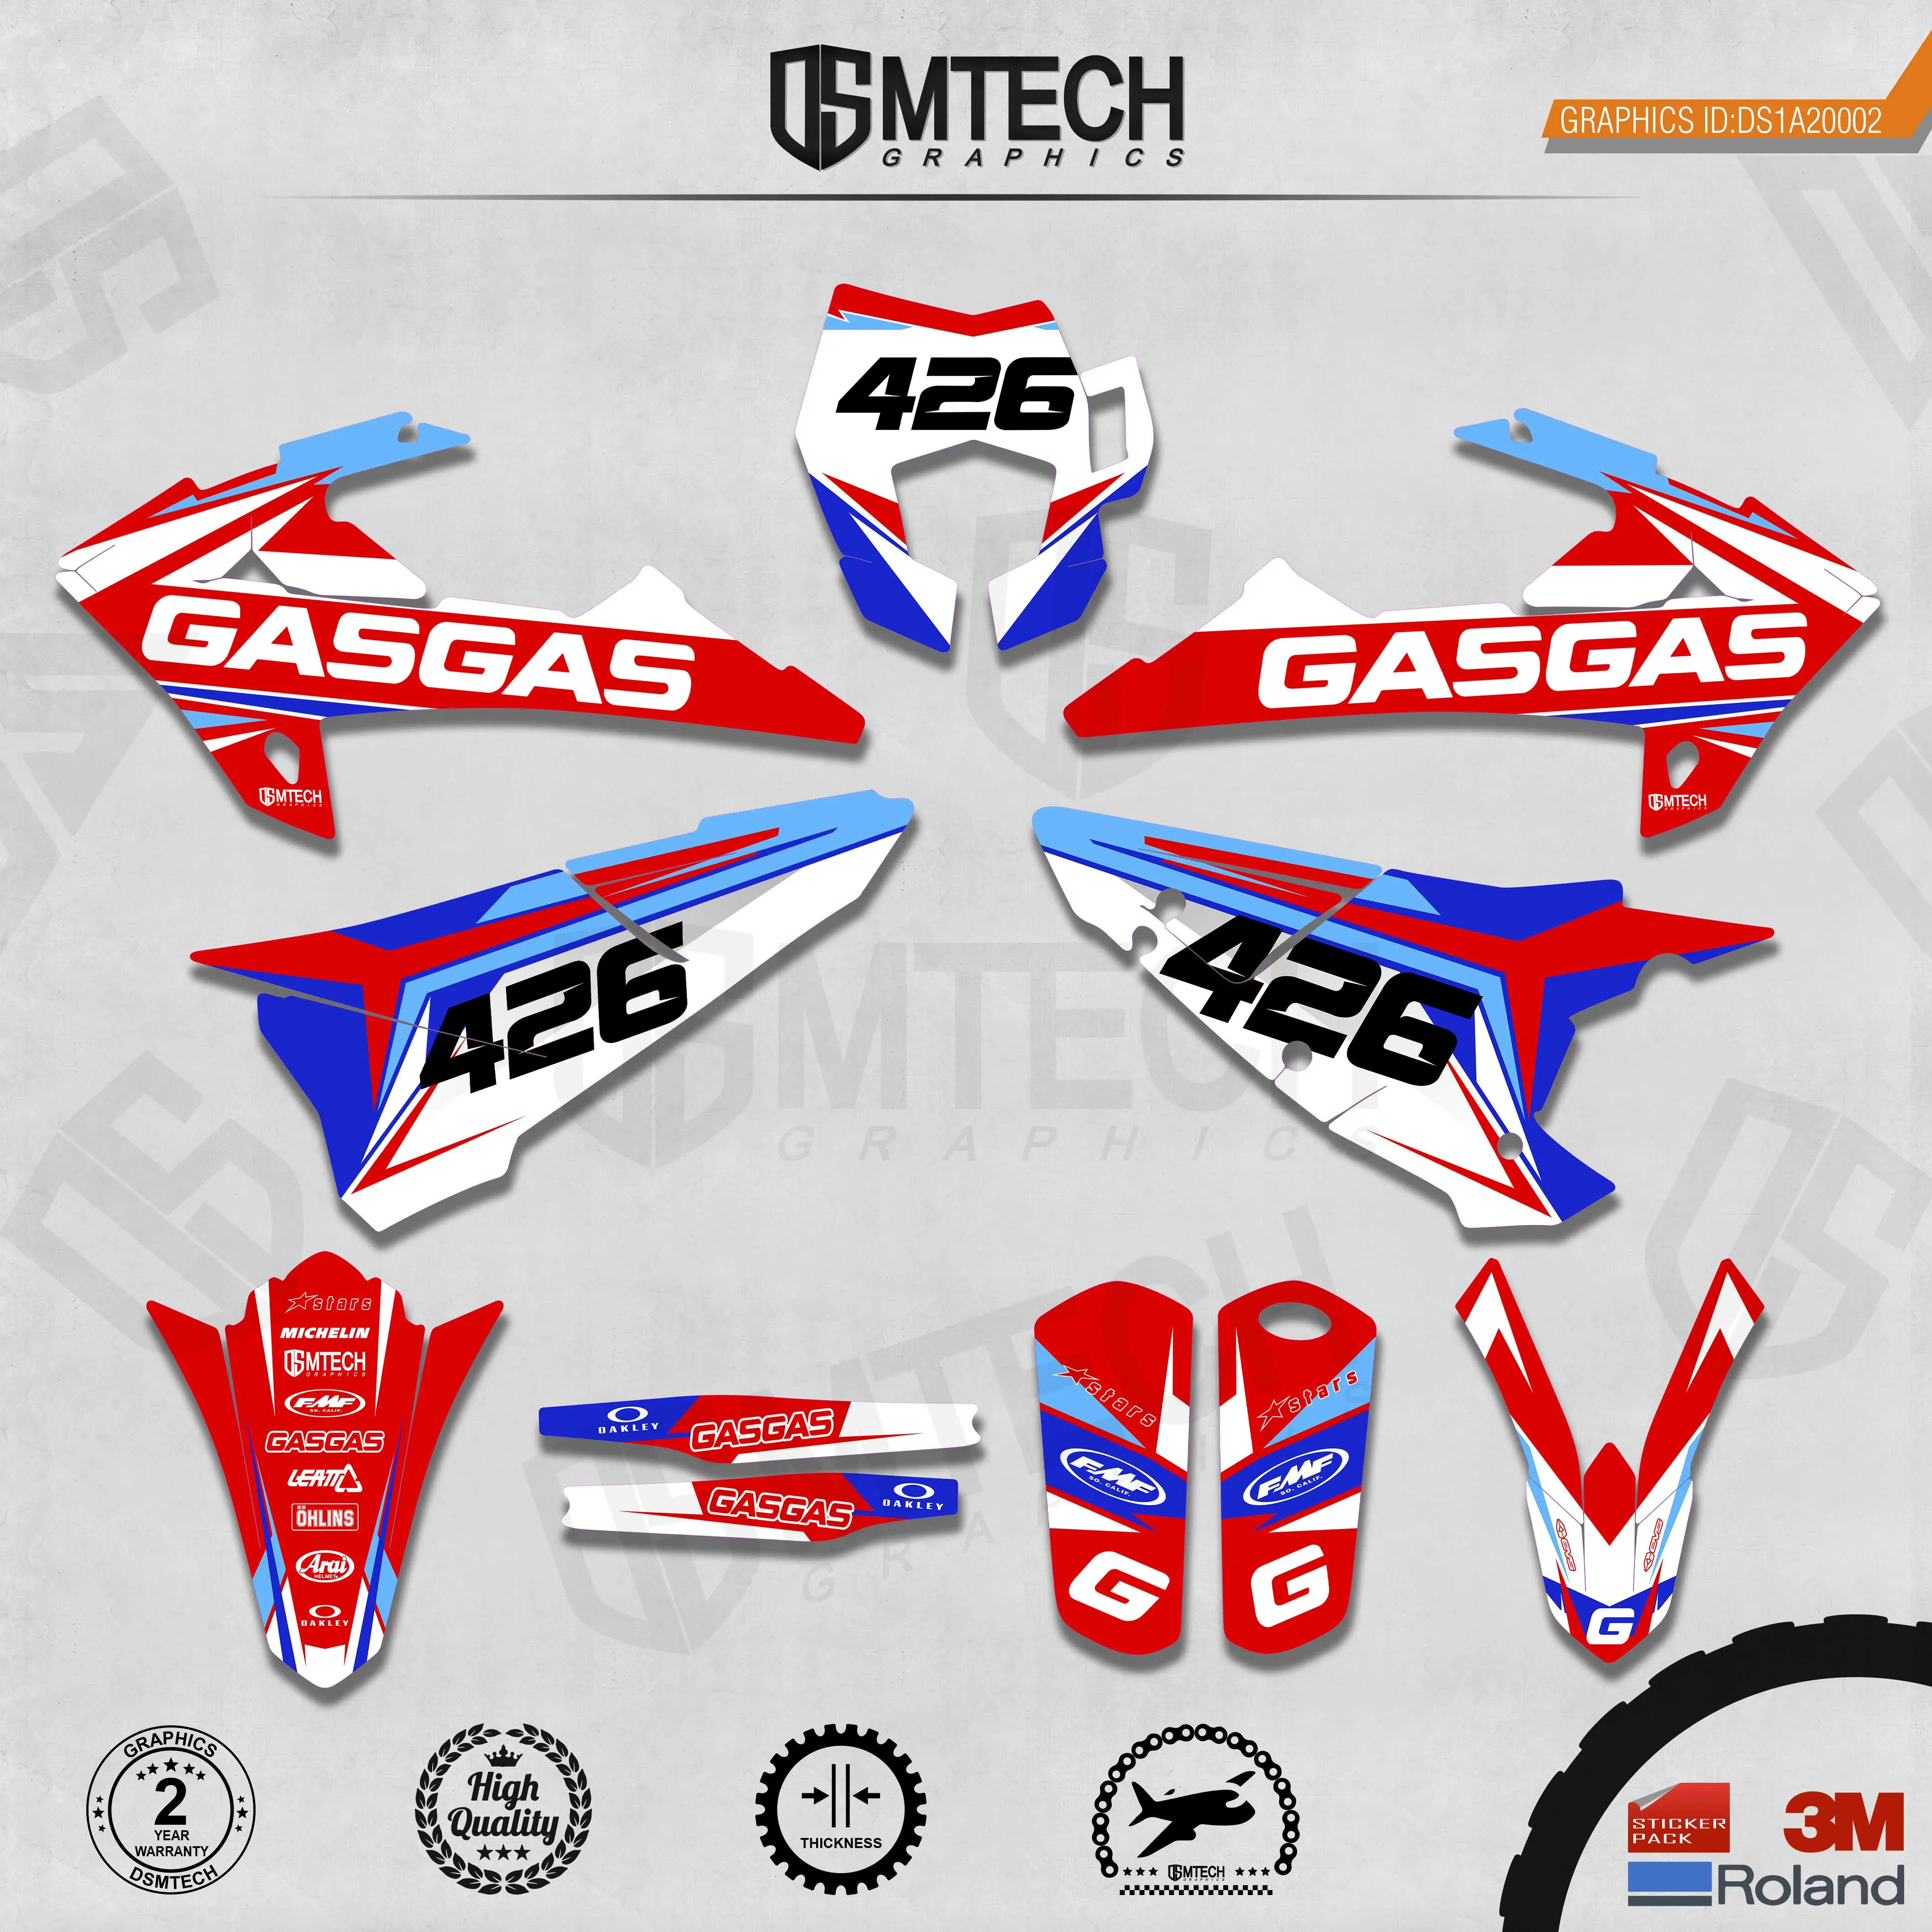 DSMTECH Customized Team Graphics Backgrounds Decals 3M Custom Stickers For  GASGAS 2018 2019 2020  EC 002